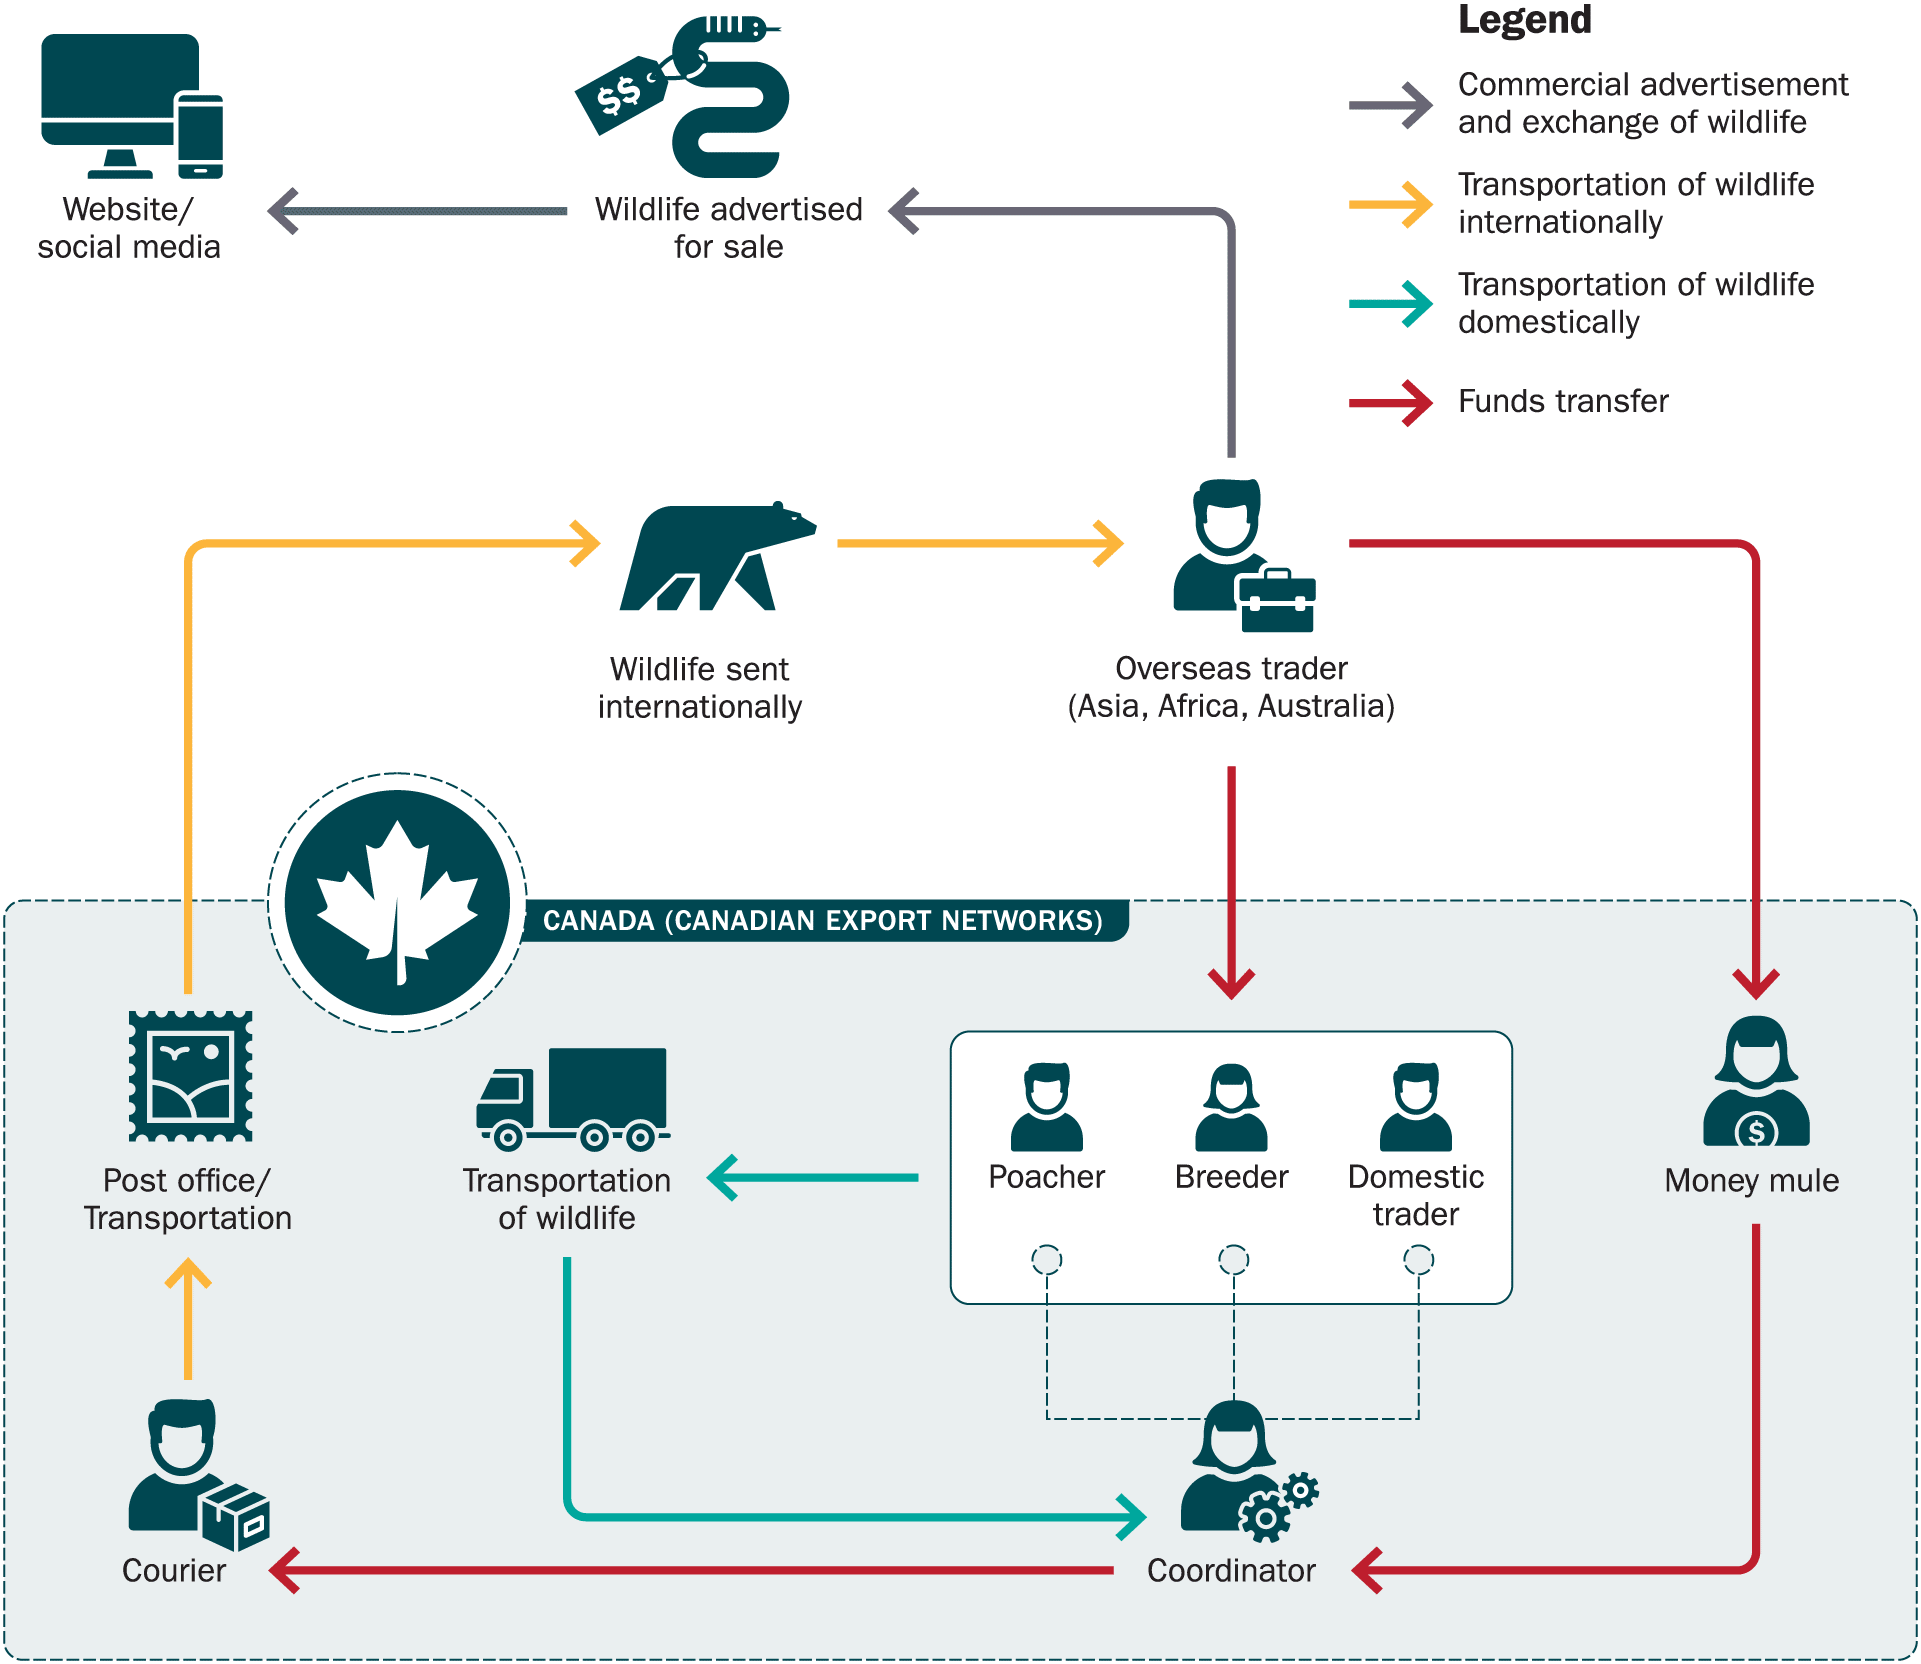 Network of individuals and their physical, coordinating and/or financial role in the illegal export of wildlife.